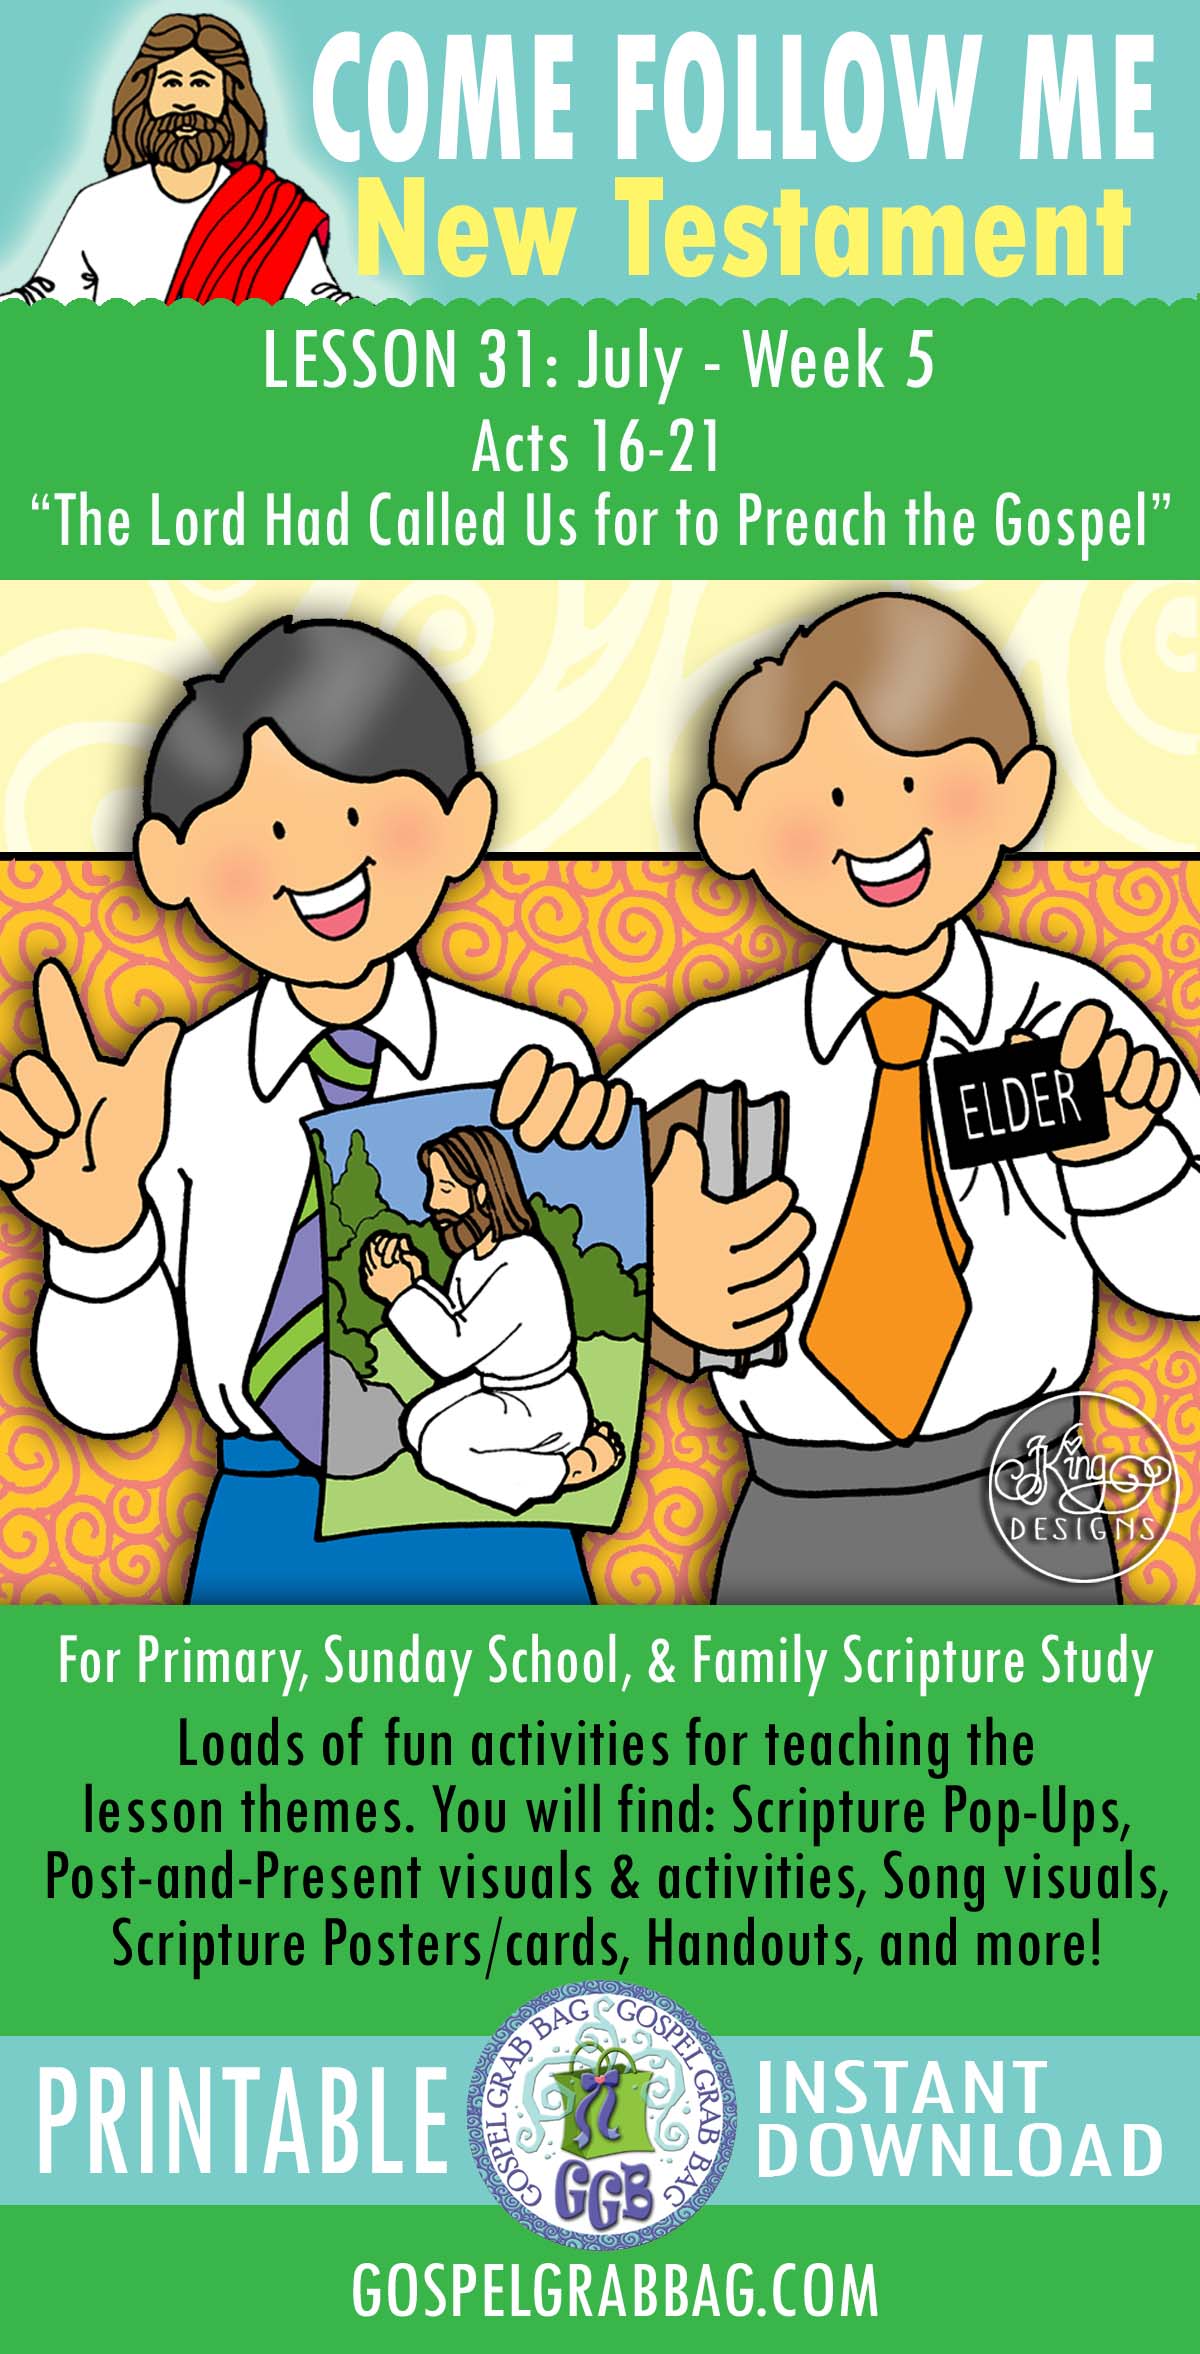 Come Follow Me Archives - Page 5 of 18 - Teaching Children the  GospelTeaching Children the Gospel